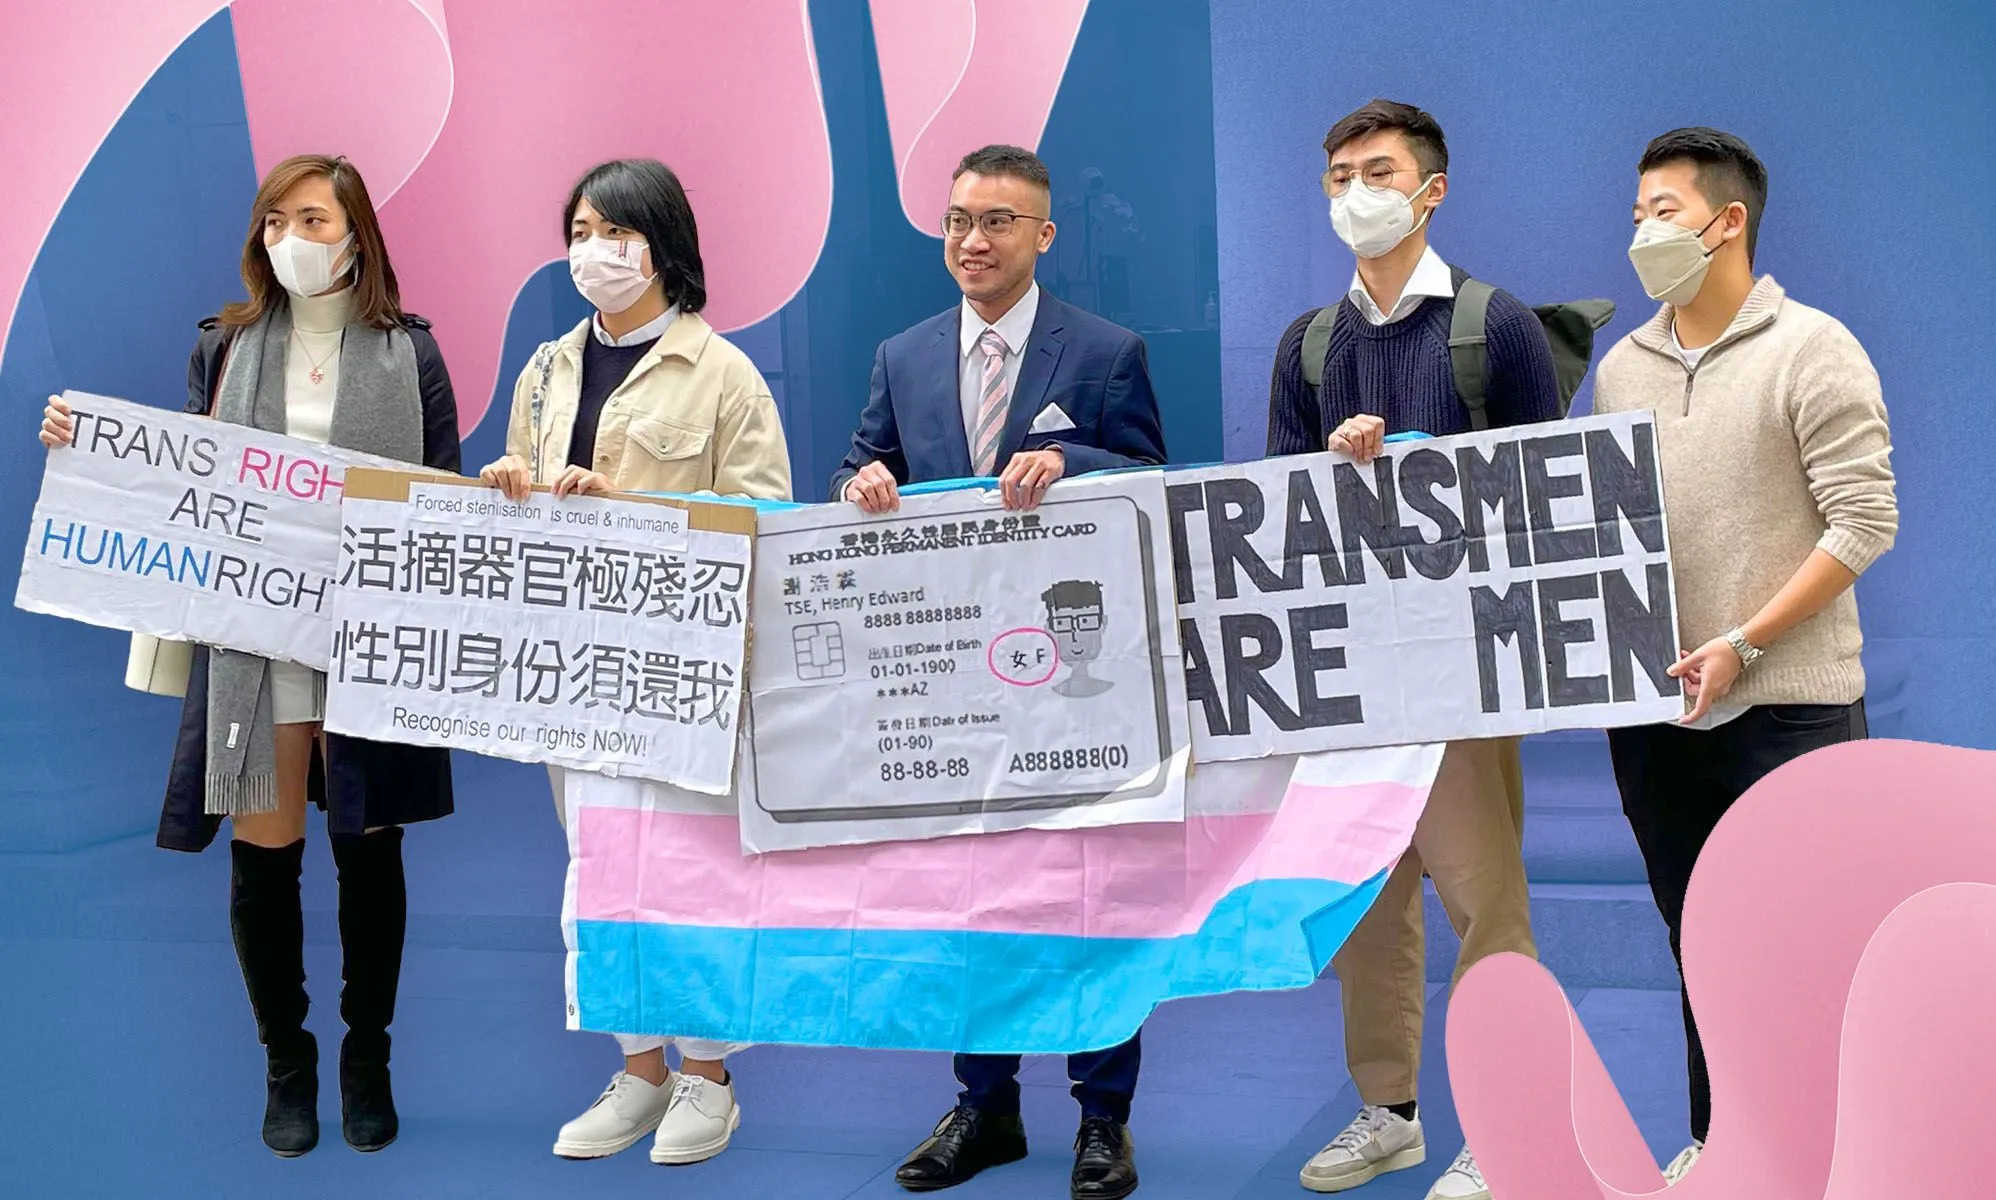 Hong Kong’s surgery for ID change policy slammed by trans activists